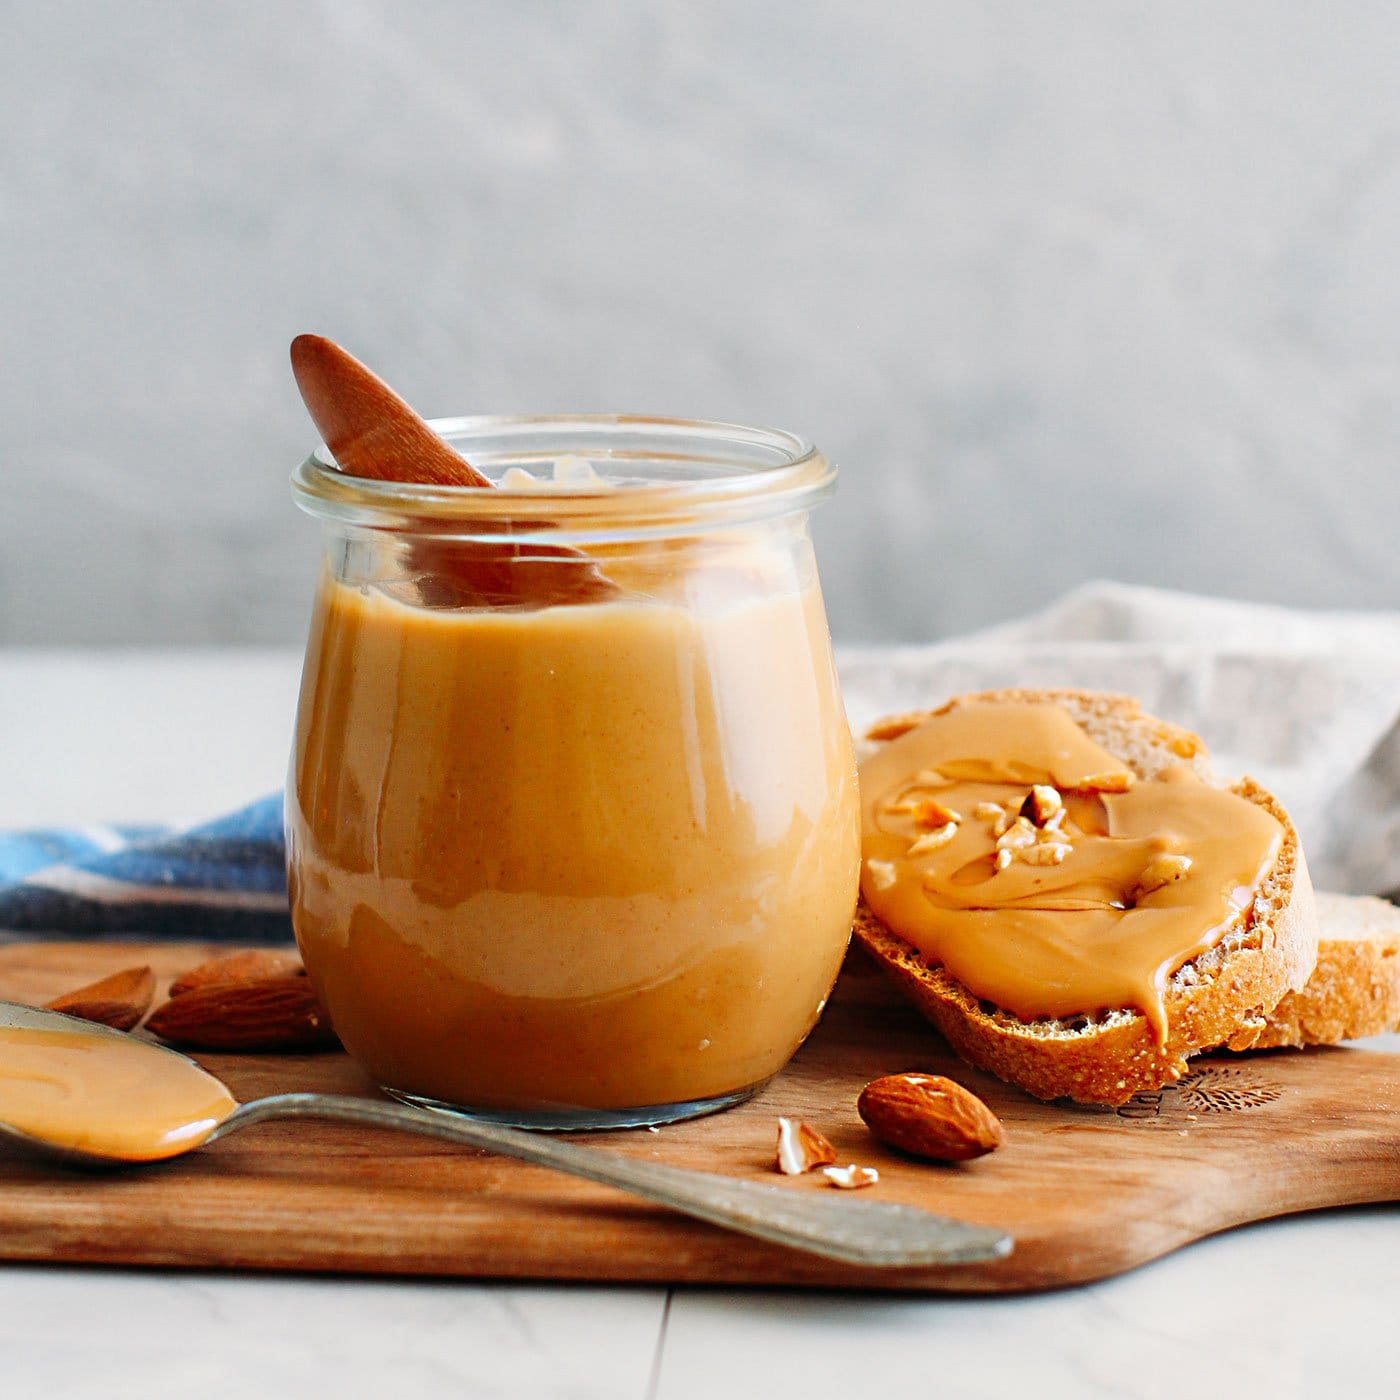 How to Make the Best Almond Butter